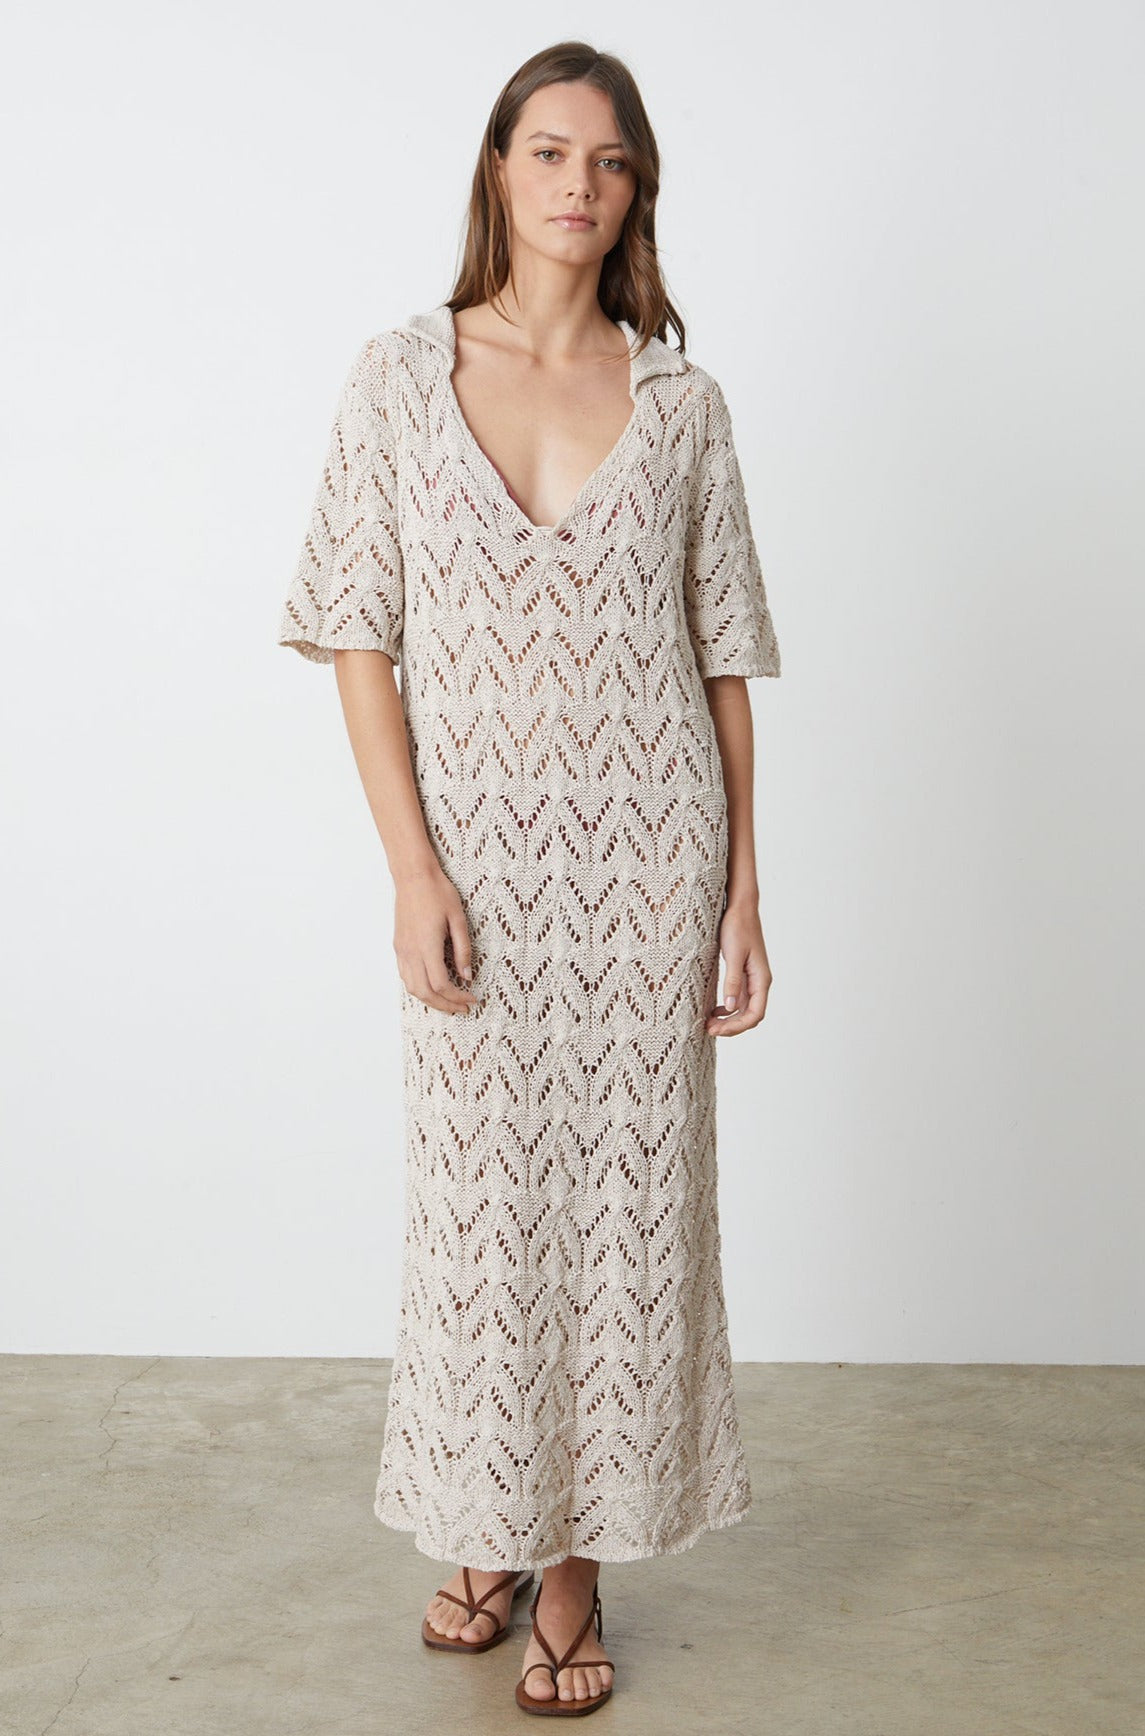   Jacqueline Crochet Stitch Maxi Dress in putty with brown sandals full length front 